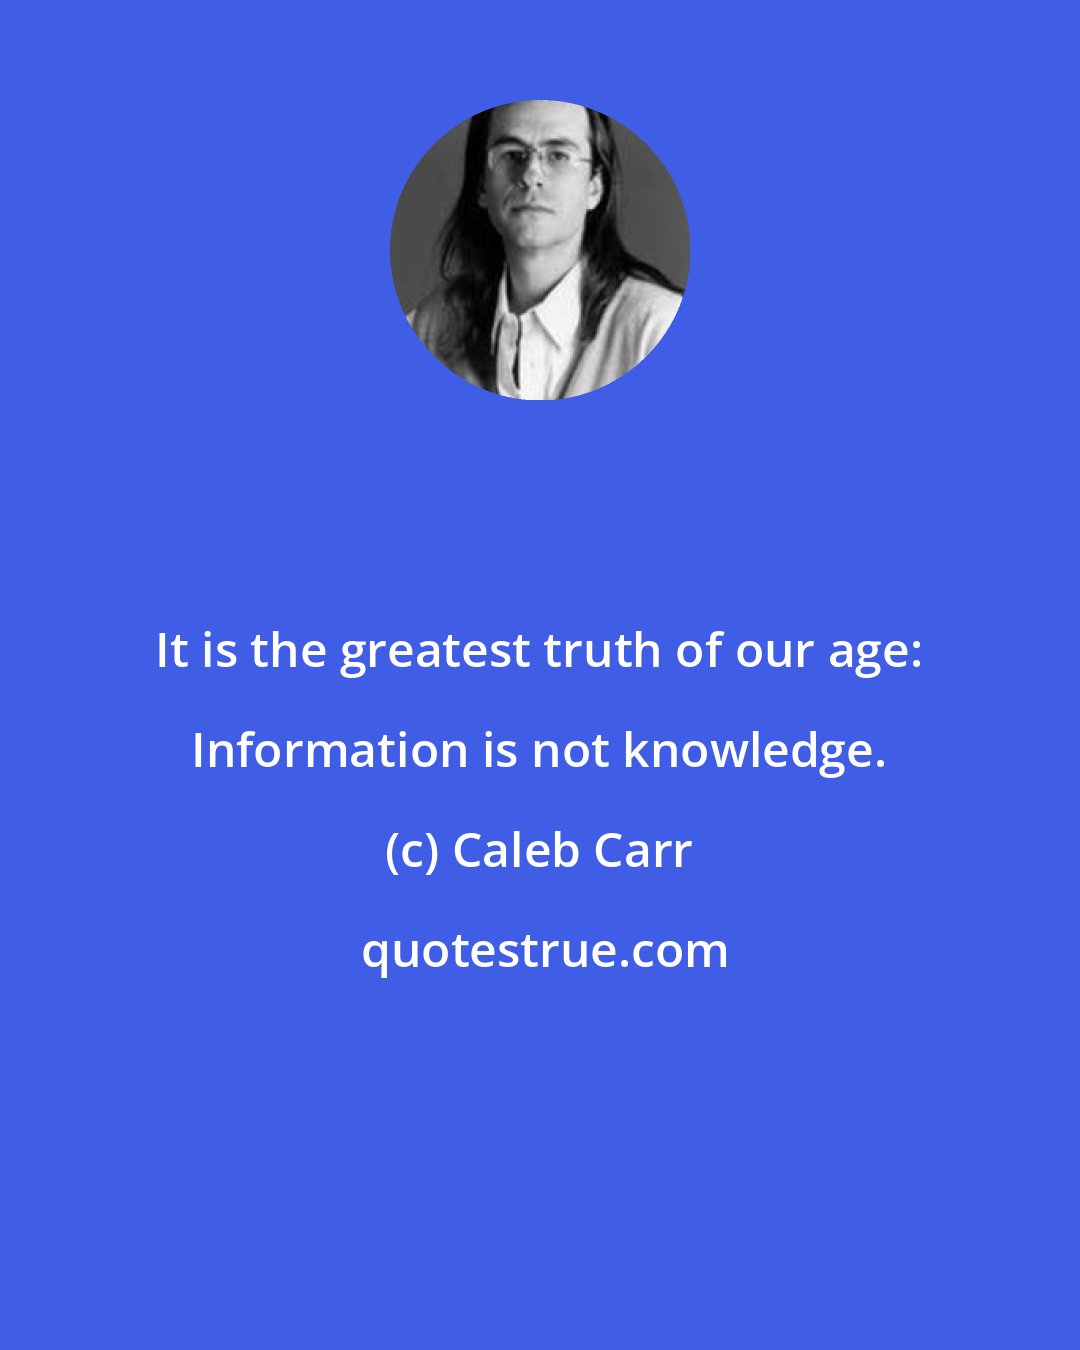 Caleb Carr: It is the greatest truth of our age: Information is not knowledge.